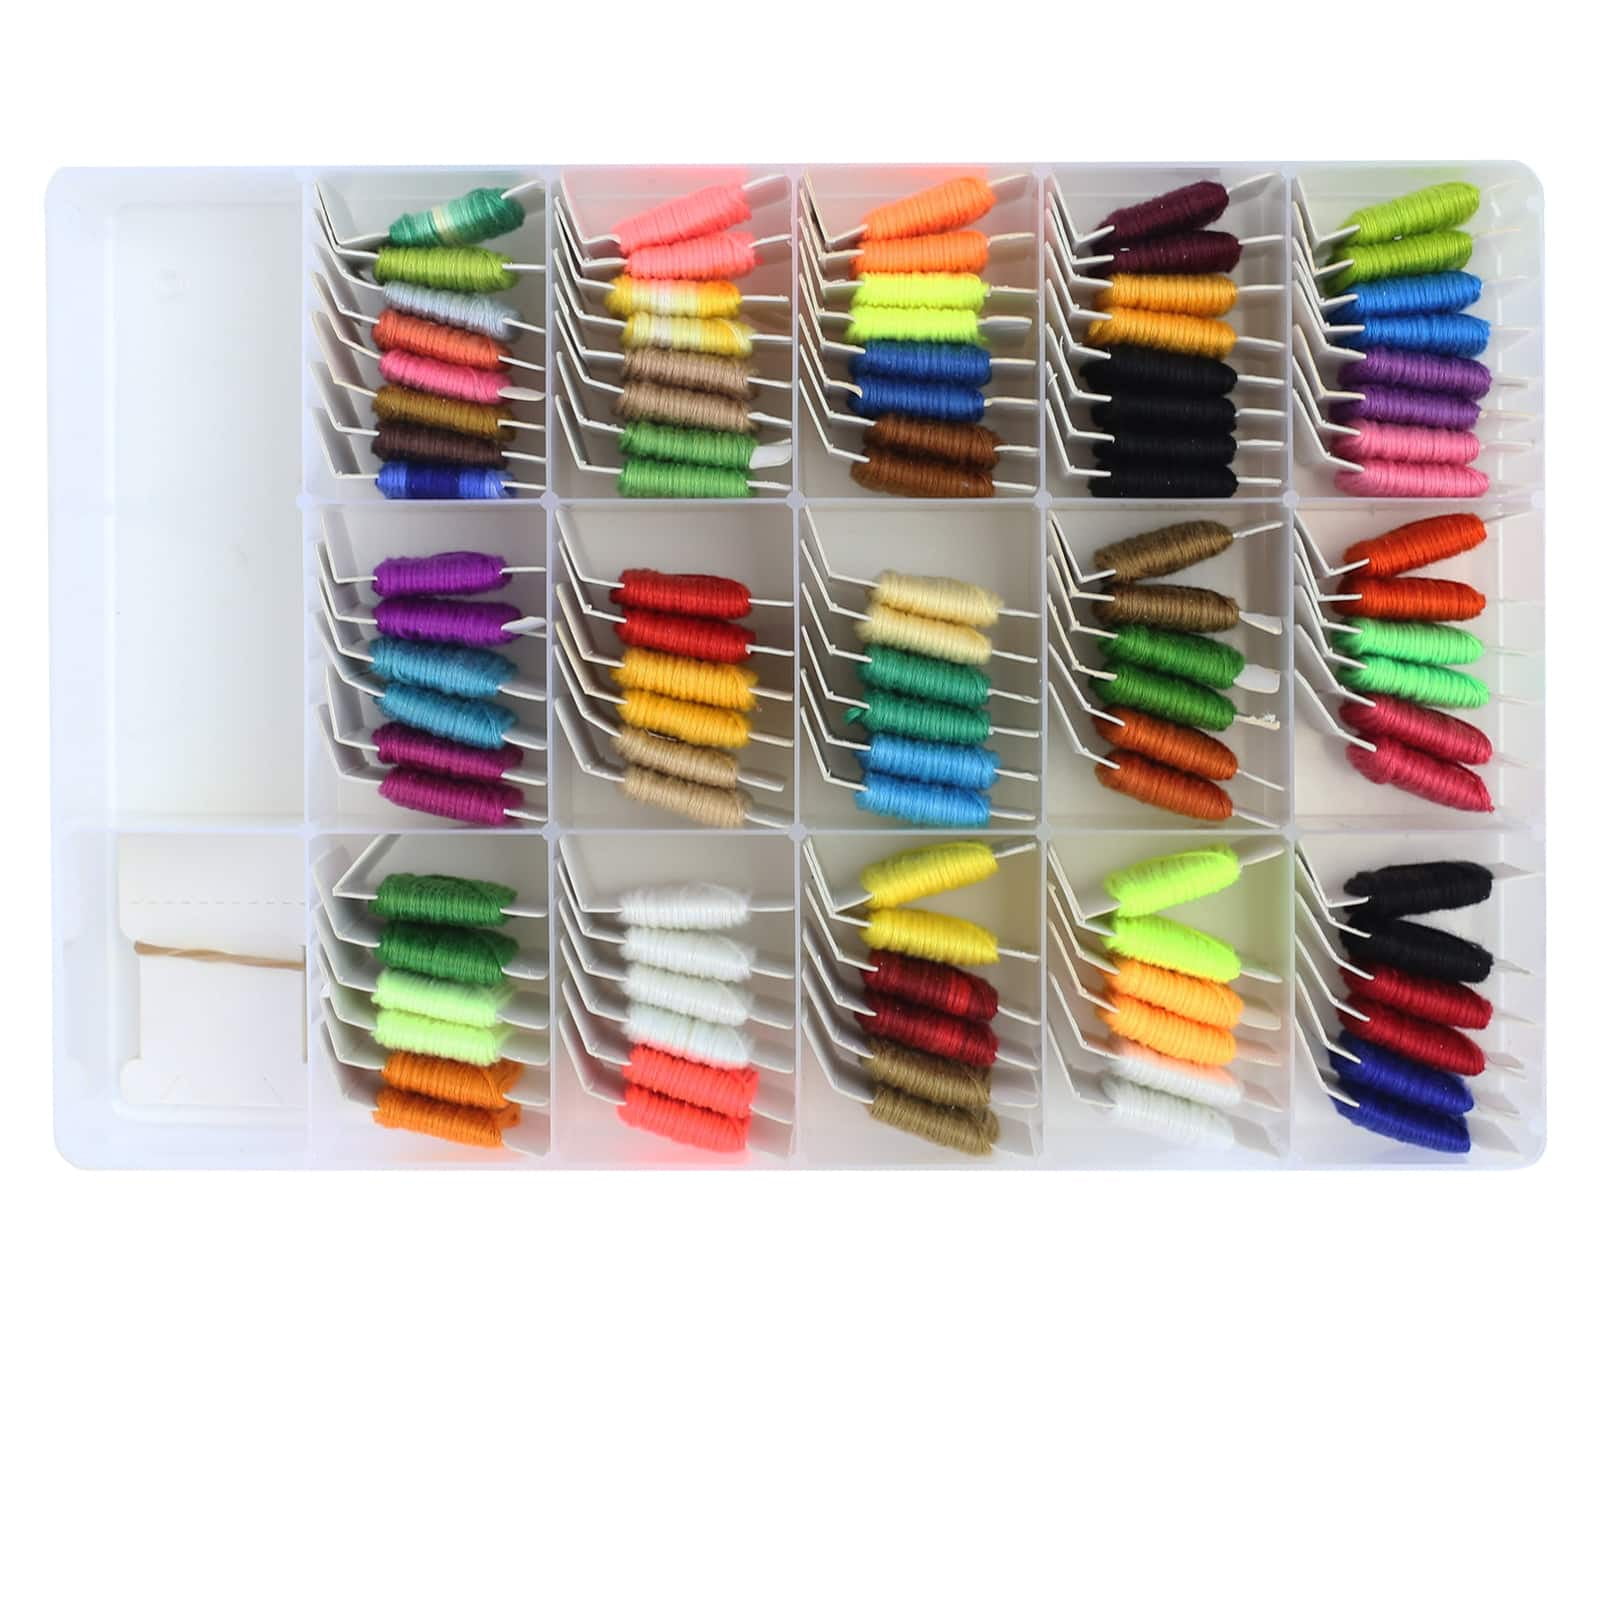 12 Pack: Embroidery Floss Organizer Kit by Loops & Threads, Size: 10.625 x 7.125 x 1.75